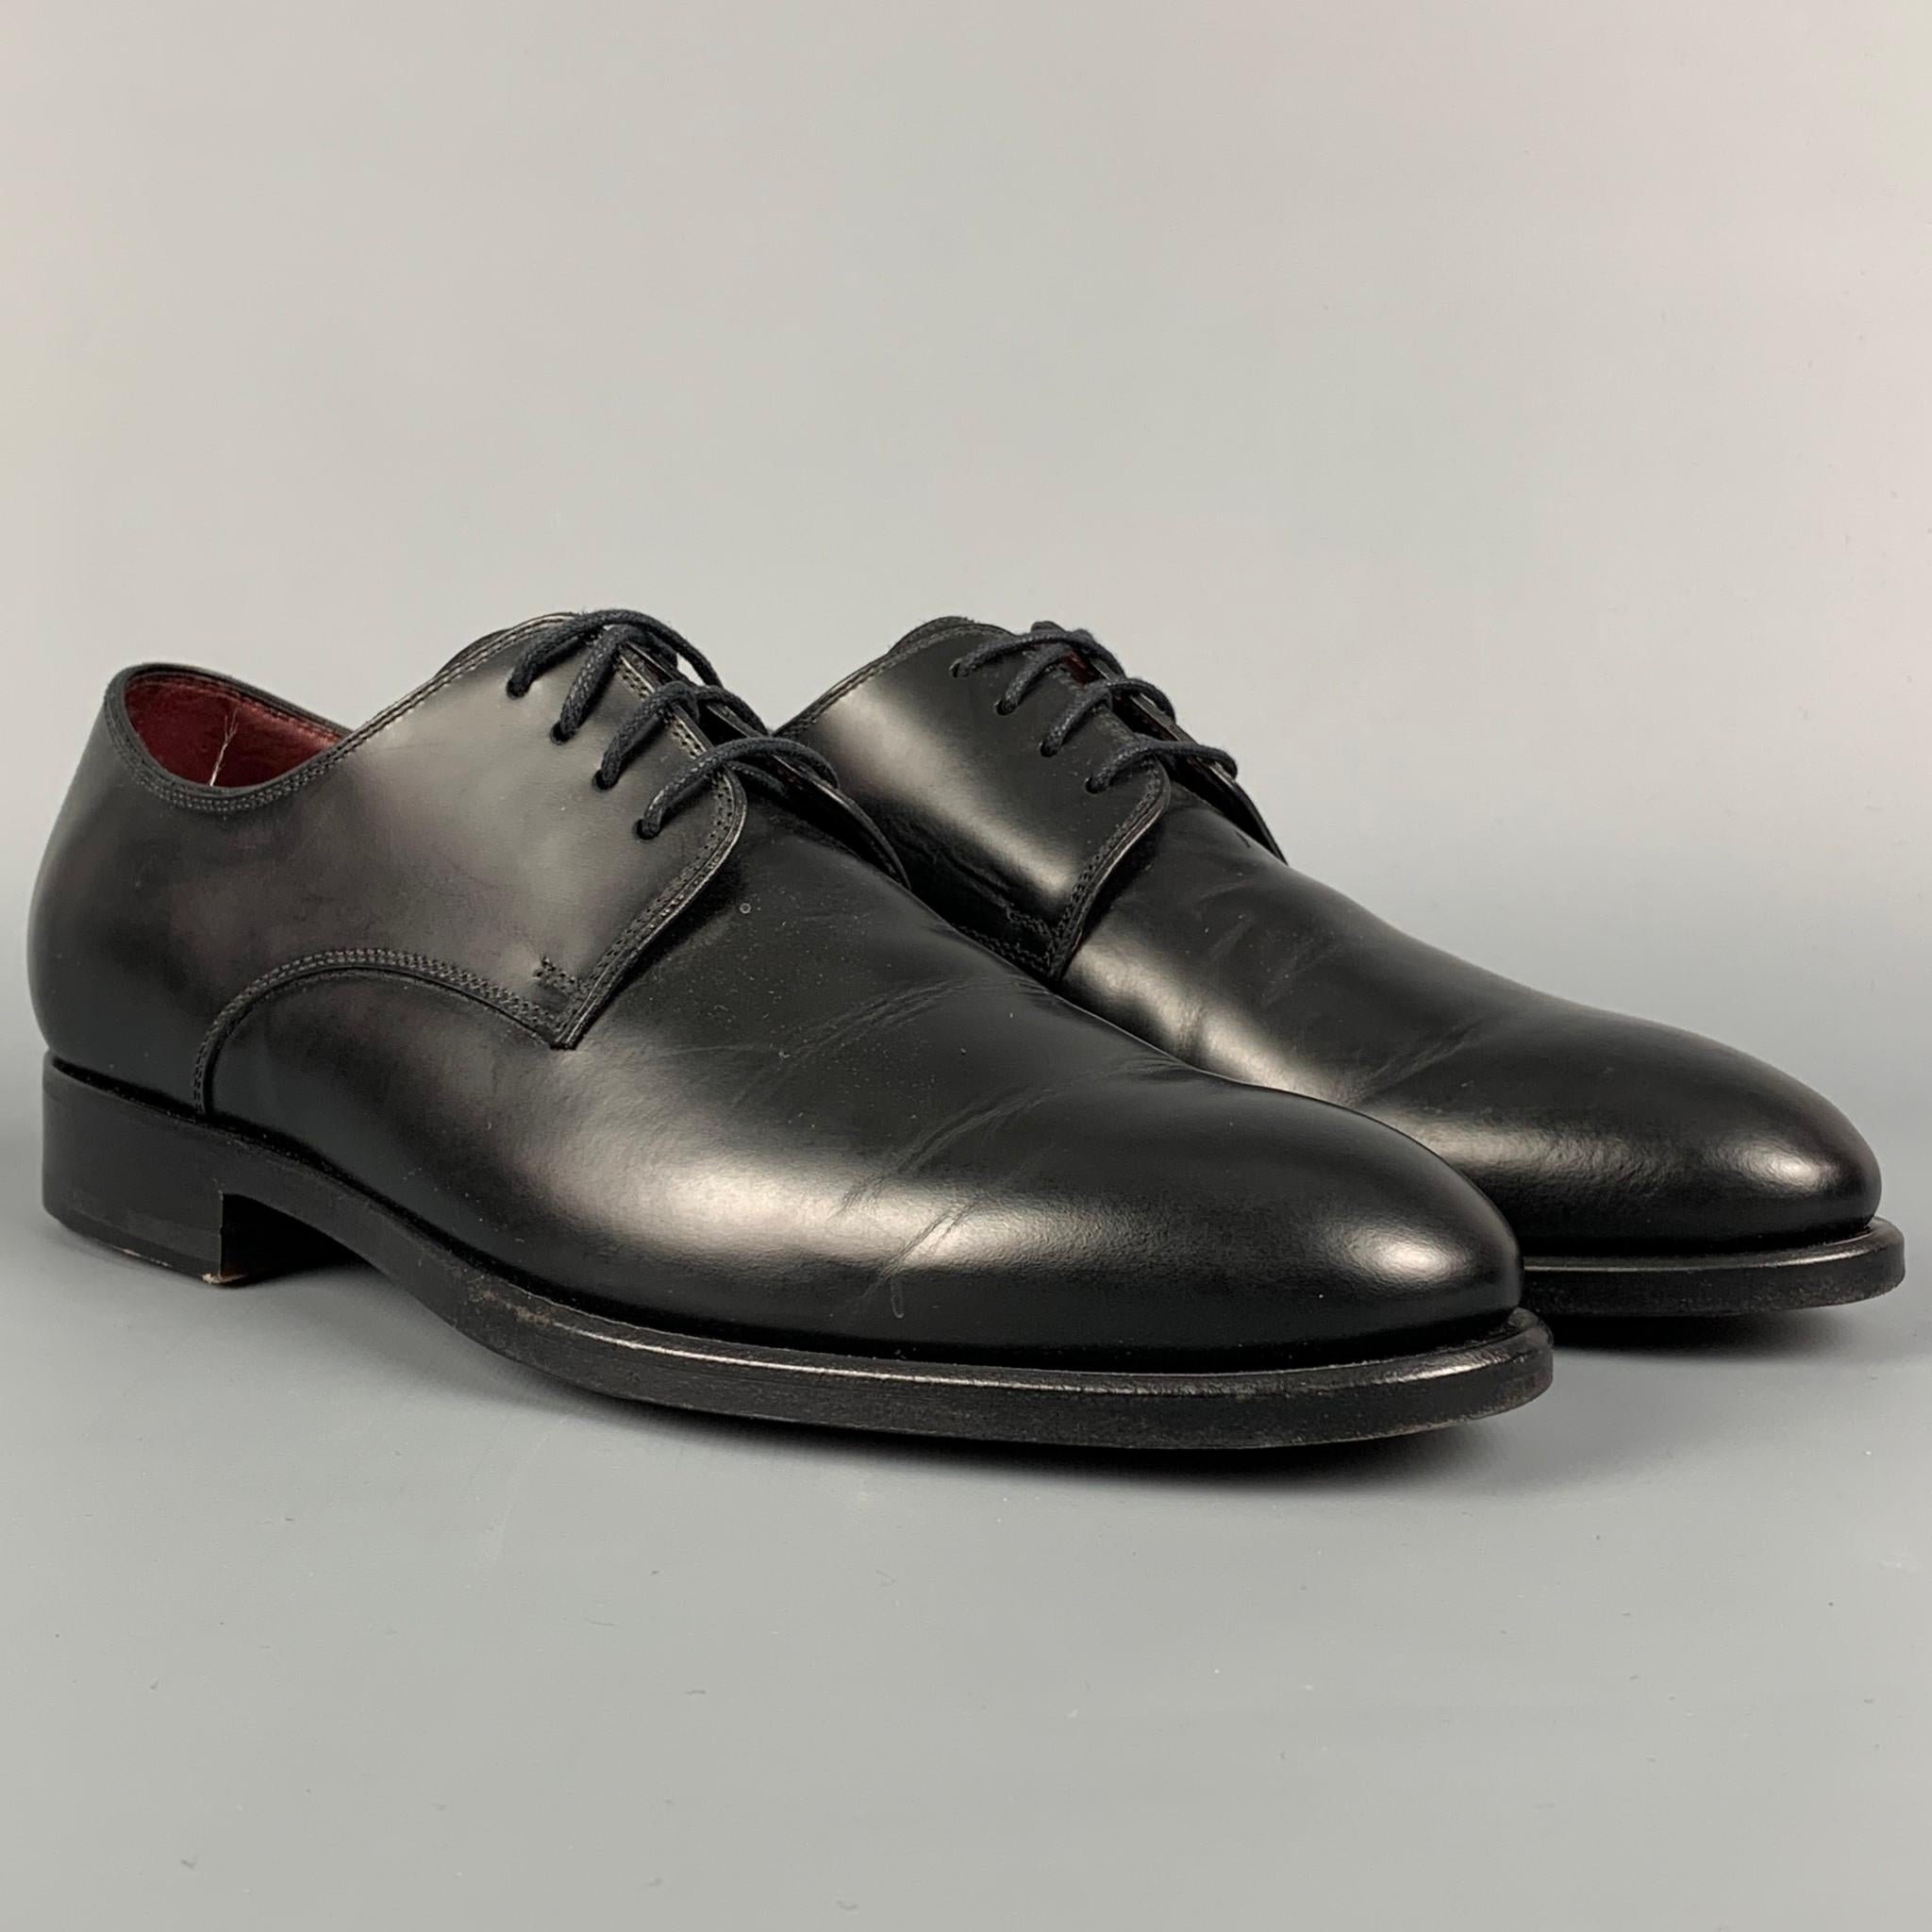 CANALI shoes comes in a black leather featuring a round toe and a lace up closure. Made in Italy.

Very Good Pre-Owned Condition.
Marked: 41

Outsole: 11.5 in. x 4 in. 